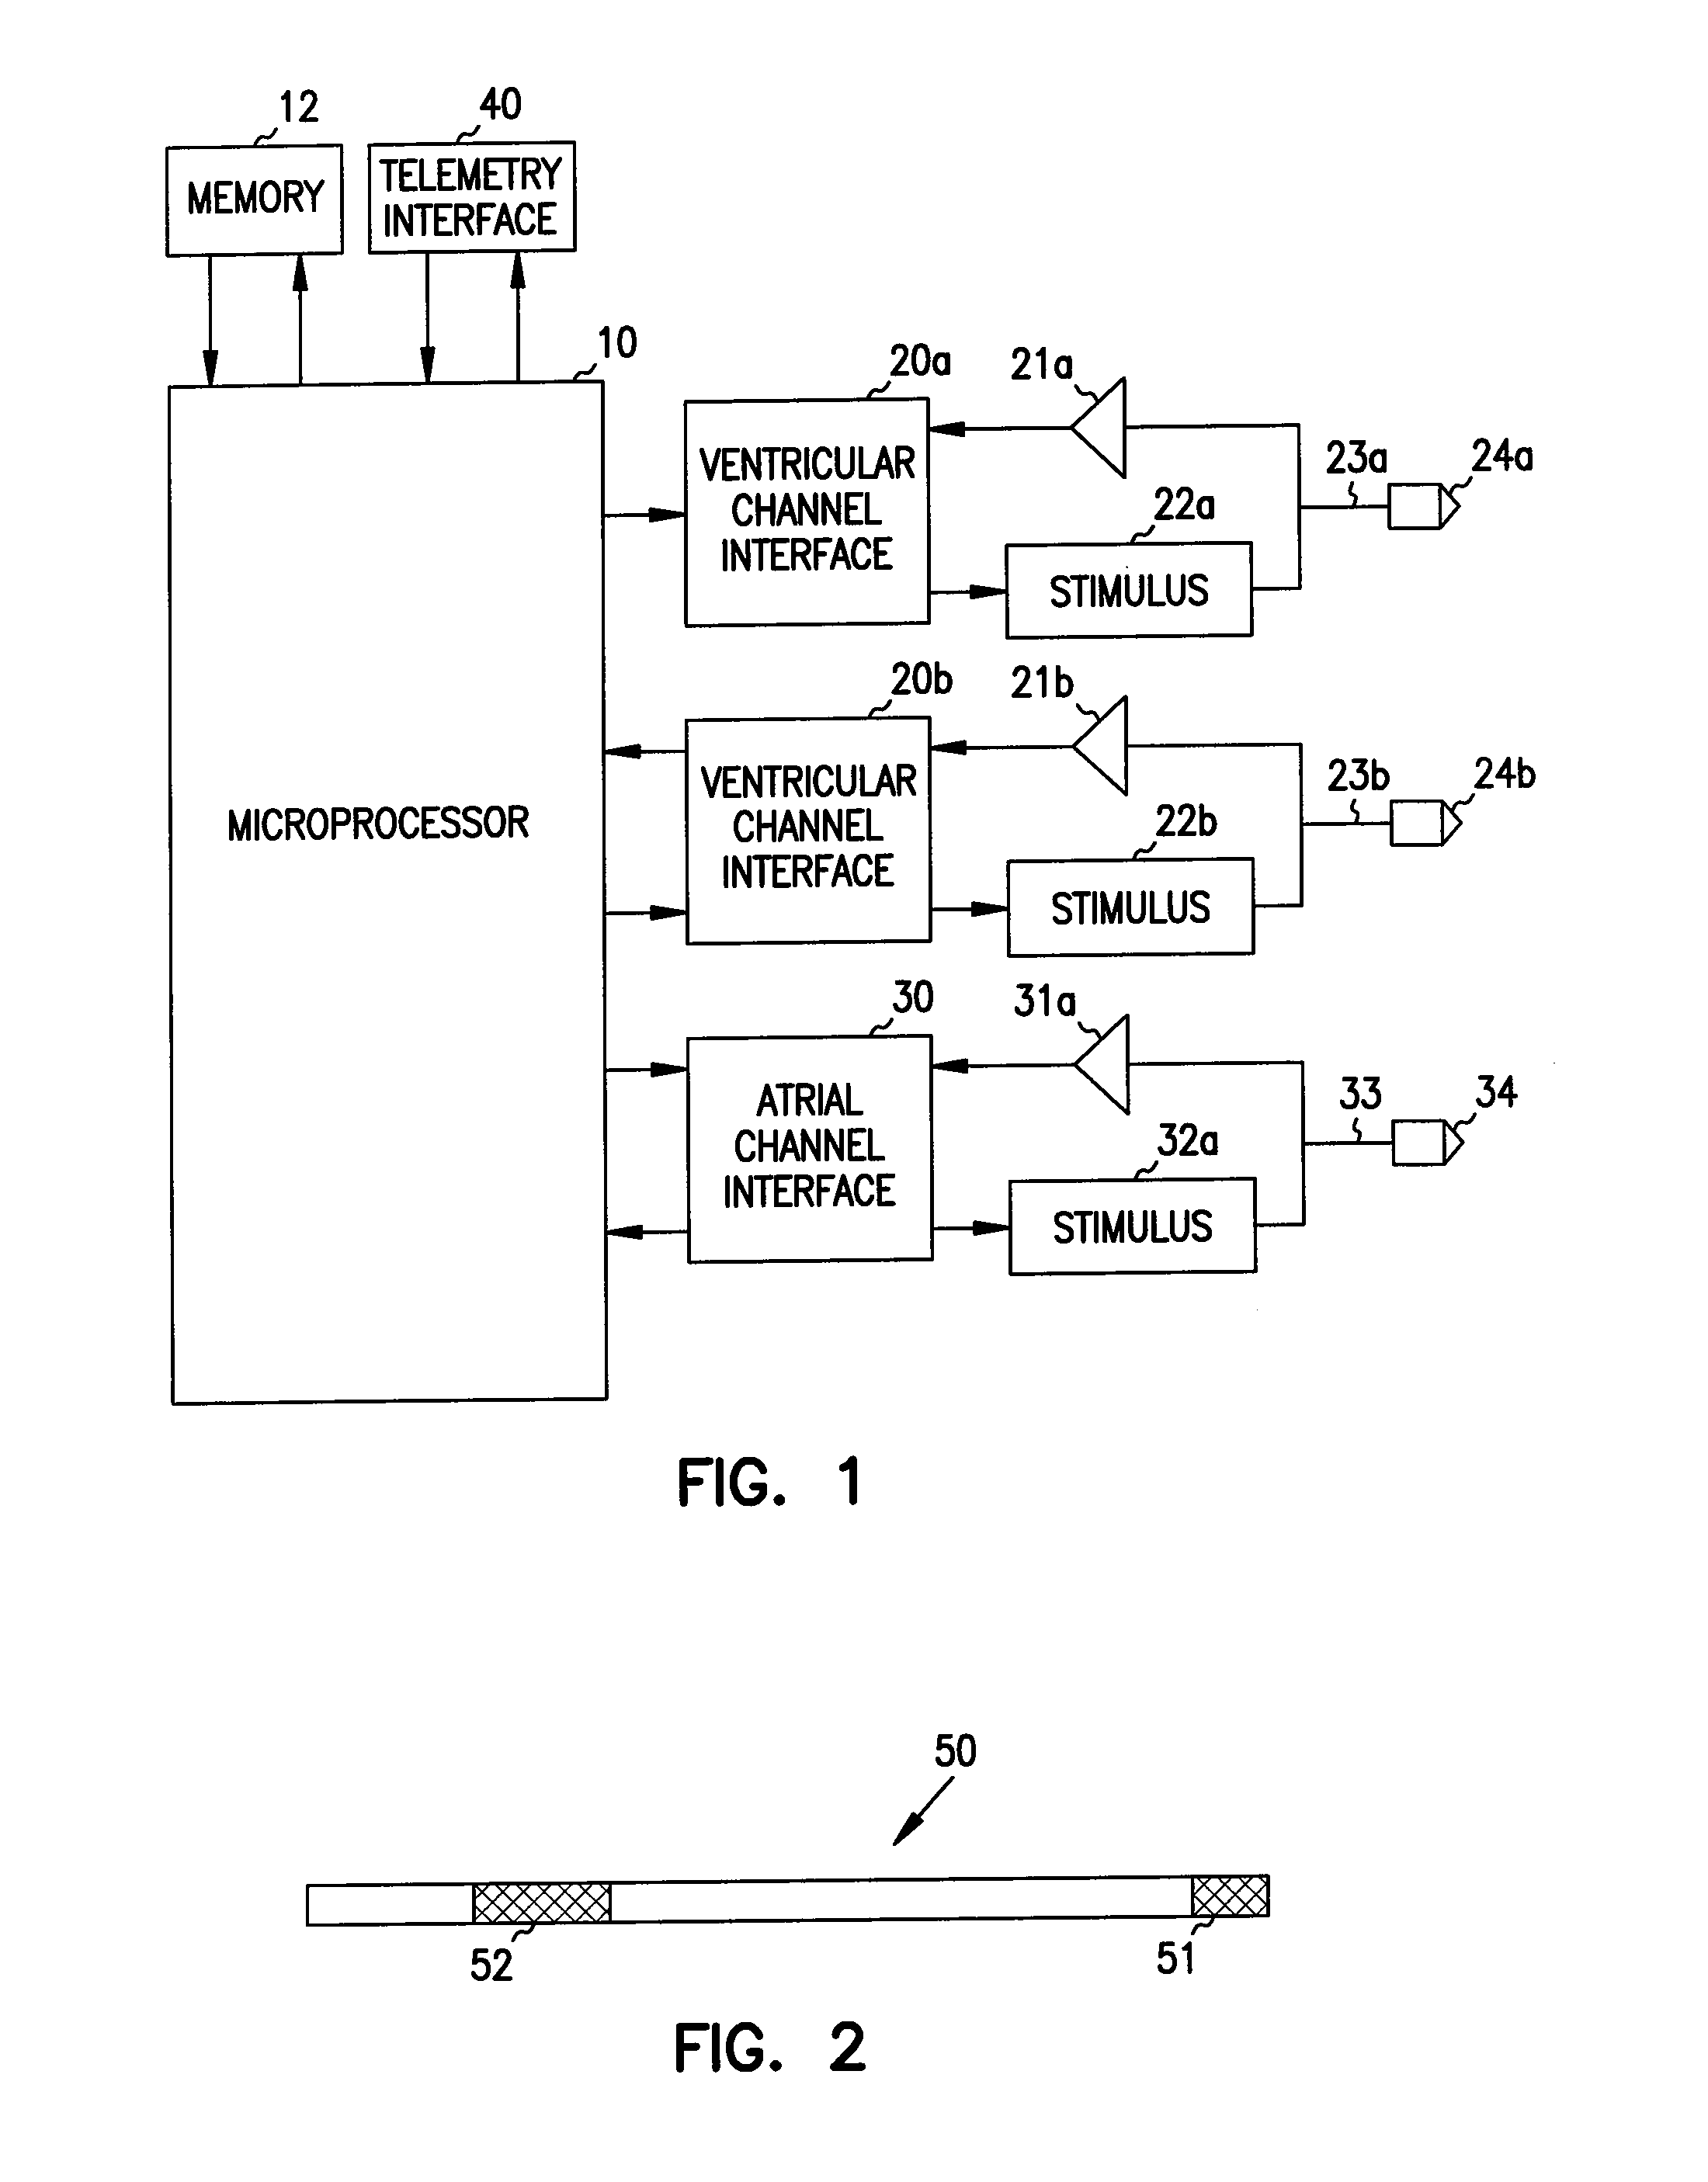 Apparatus and method for spatially and temporally distributing cardiac electrical stimulation